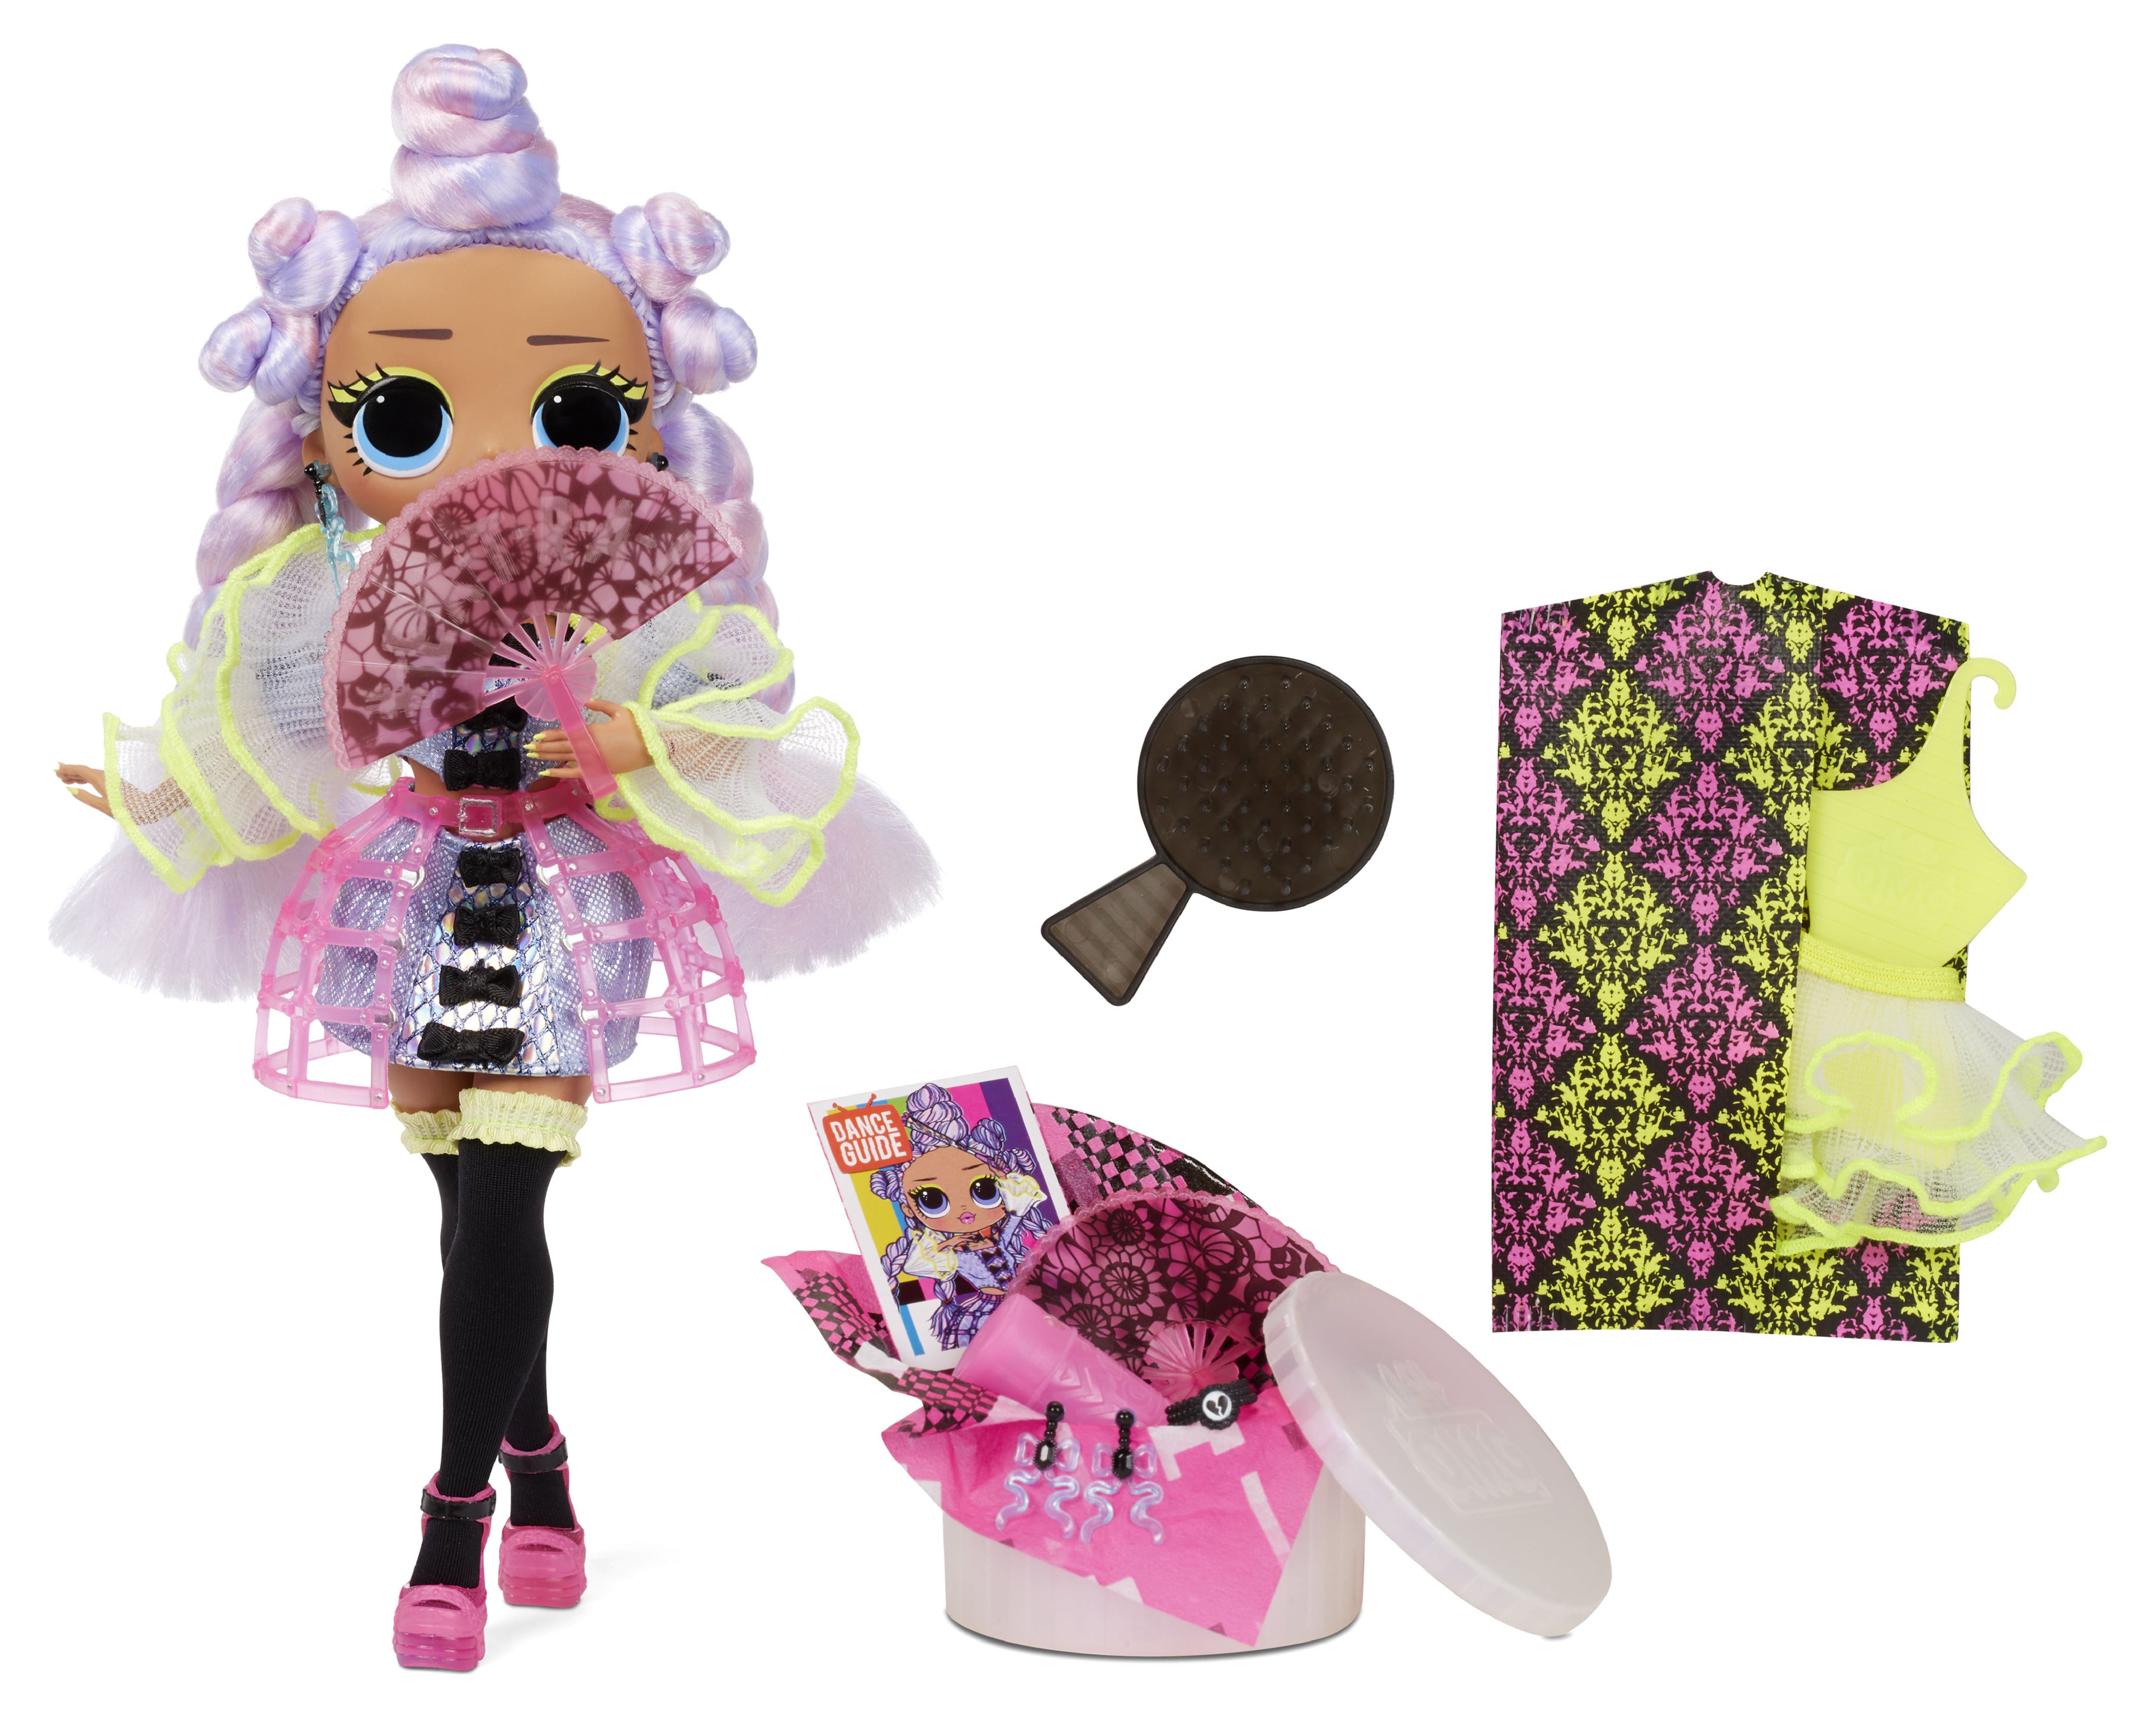 LOL Surprise OMG Dance Dance Dance Miss Royale Fashion Doll With 15 Surprises Including Magic Blacklight, Shoes, Hair Brush, Doll Stand and TV Package - For Girls Ages 4+ - image 2 of 5